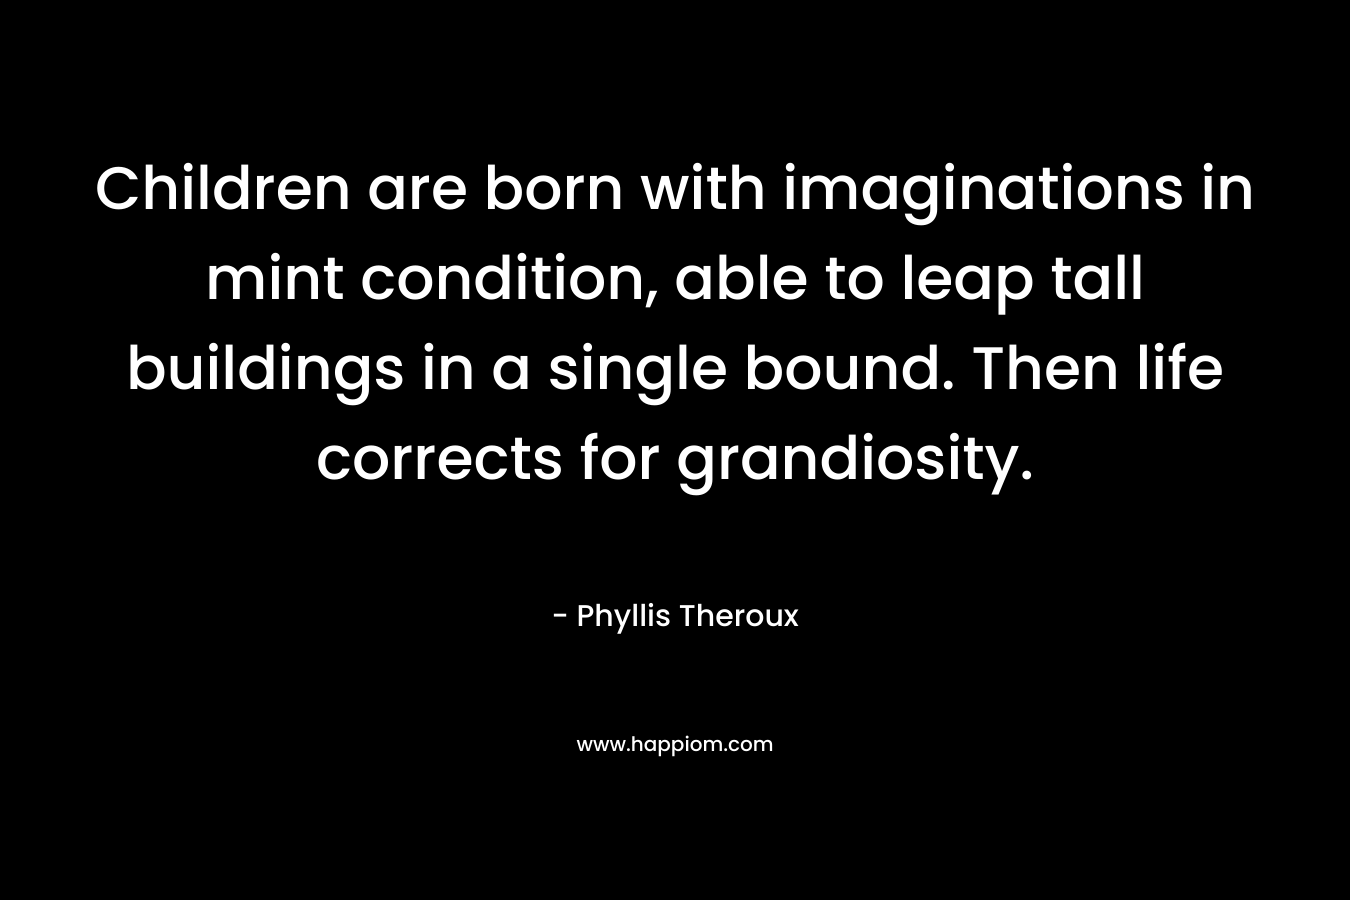 Children are born with imaginations in mint condition, able to leap tall buildings in a single bound. Then life corrects for grandiosity. – Phyllis Theroux